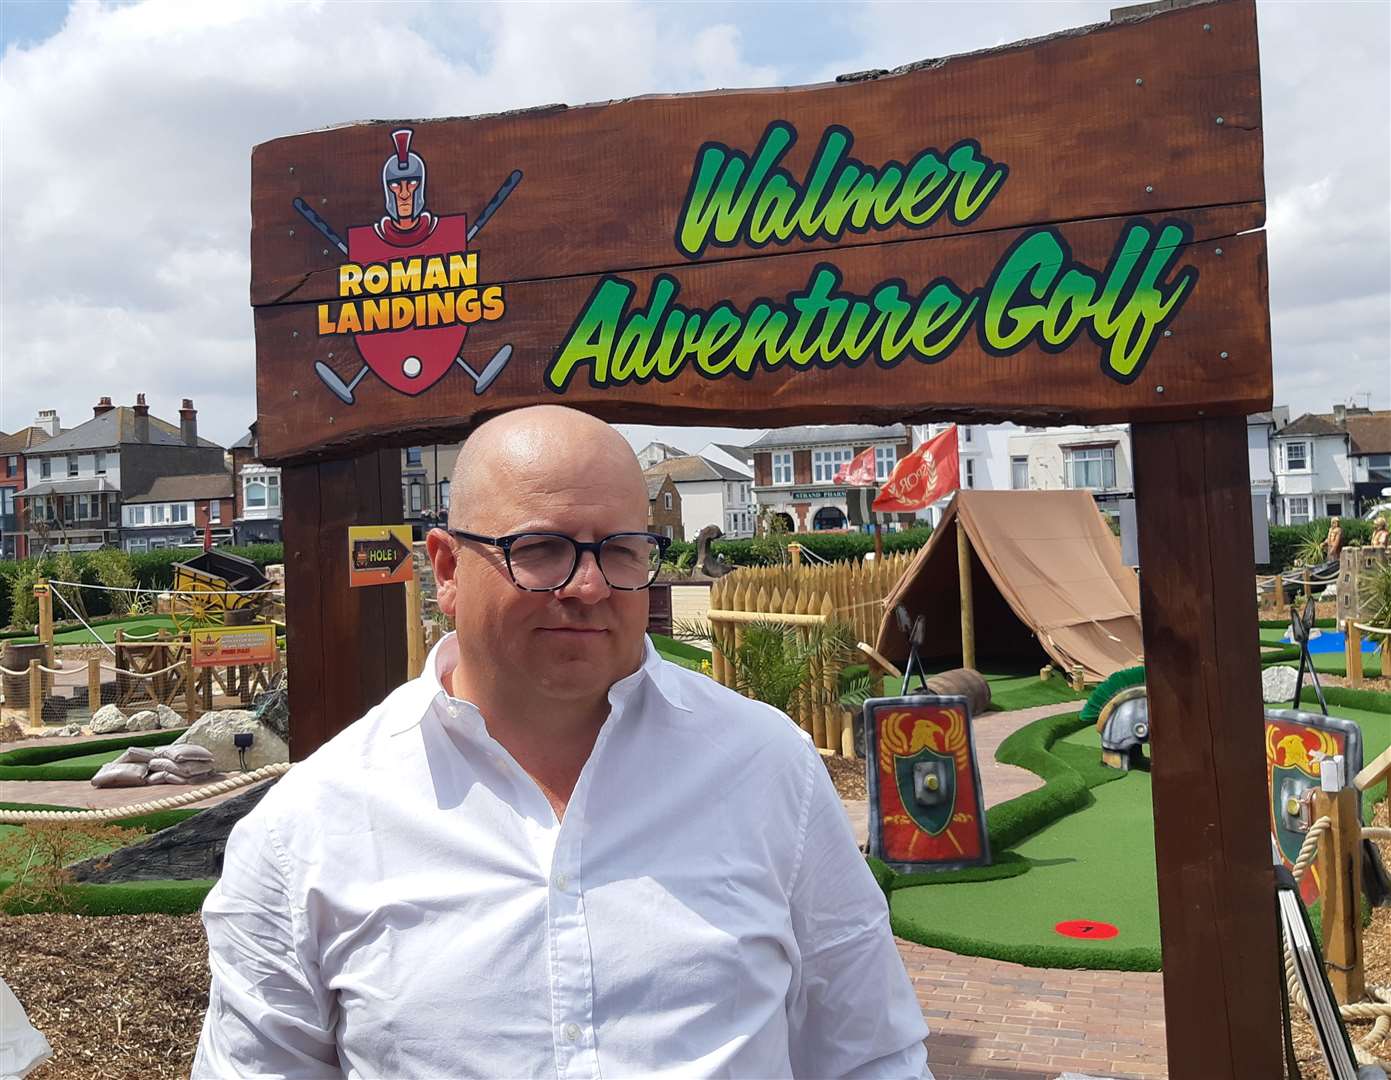 Michael Humphries has opened the new adventure golf course